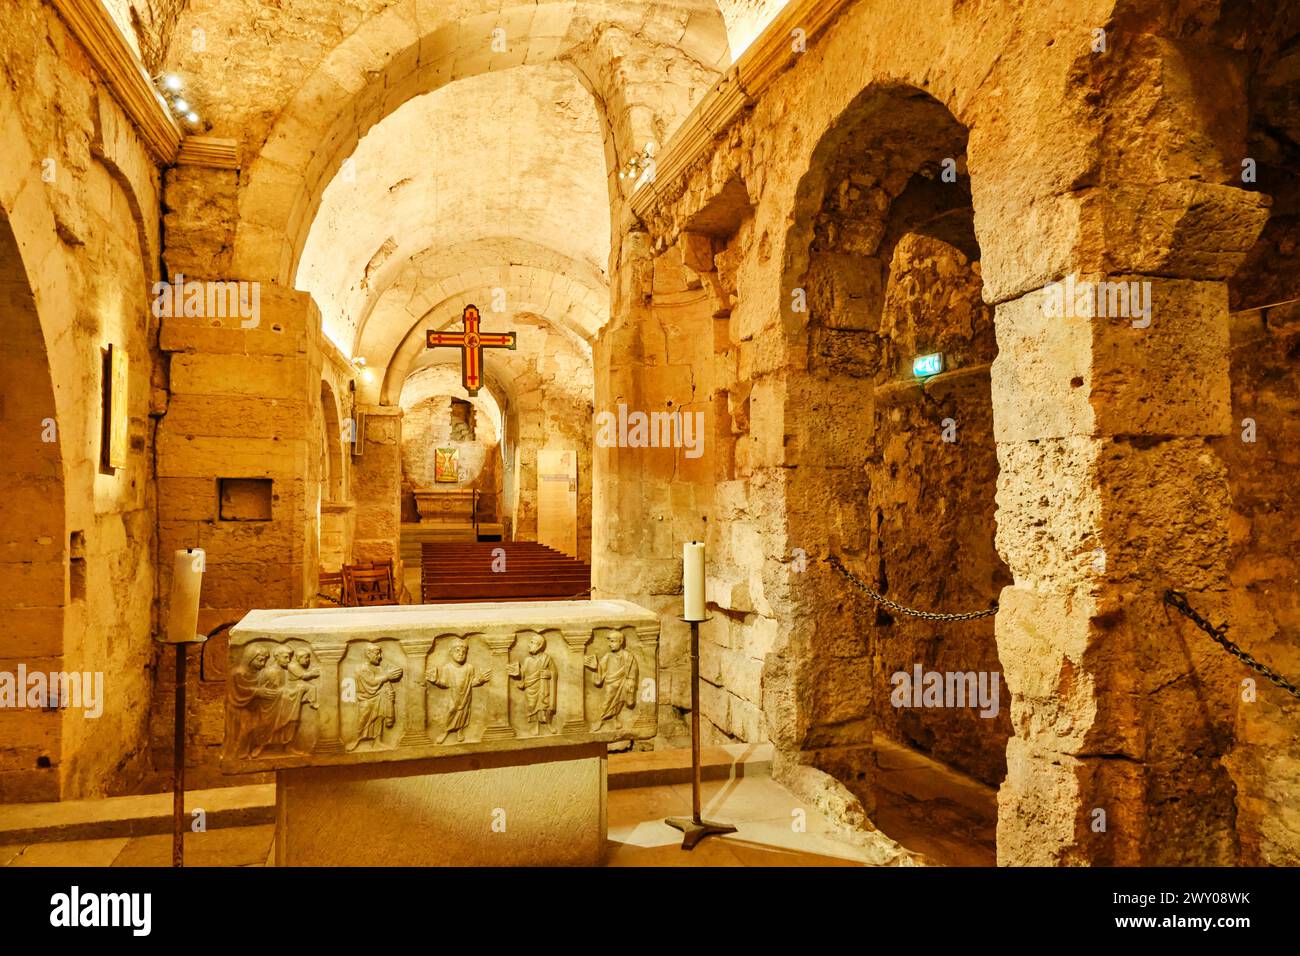 The Abbey of Saint-Victor (Abbaye Saint-Victor) is a former abbey that was founded during the late Roman period (5th century) in Marseille in the sout Stock Photo